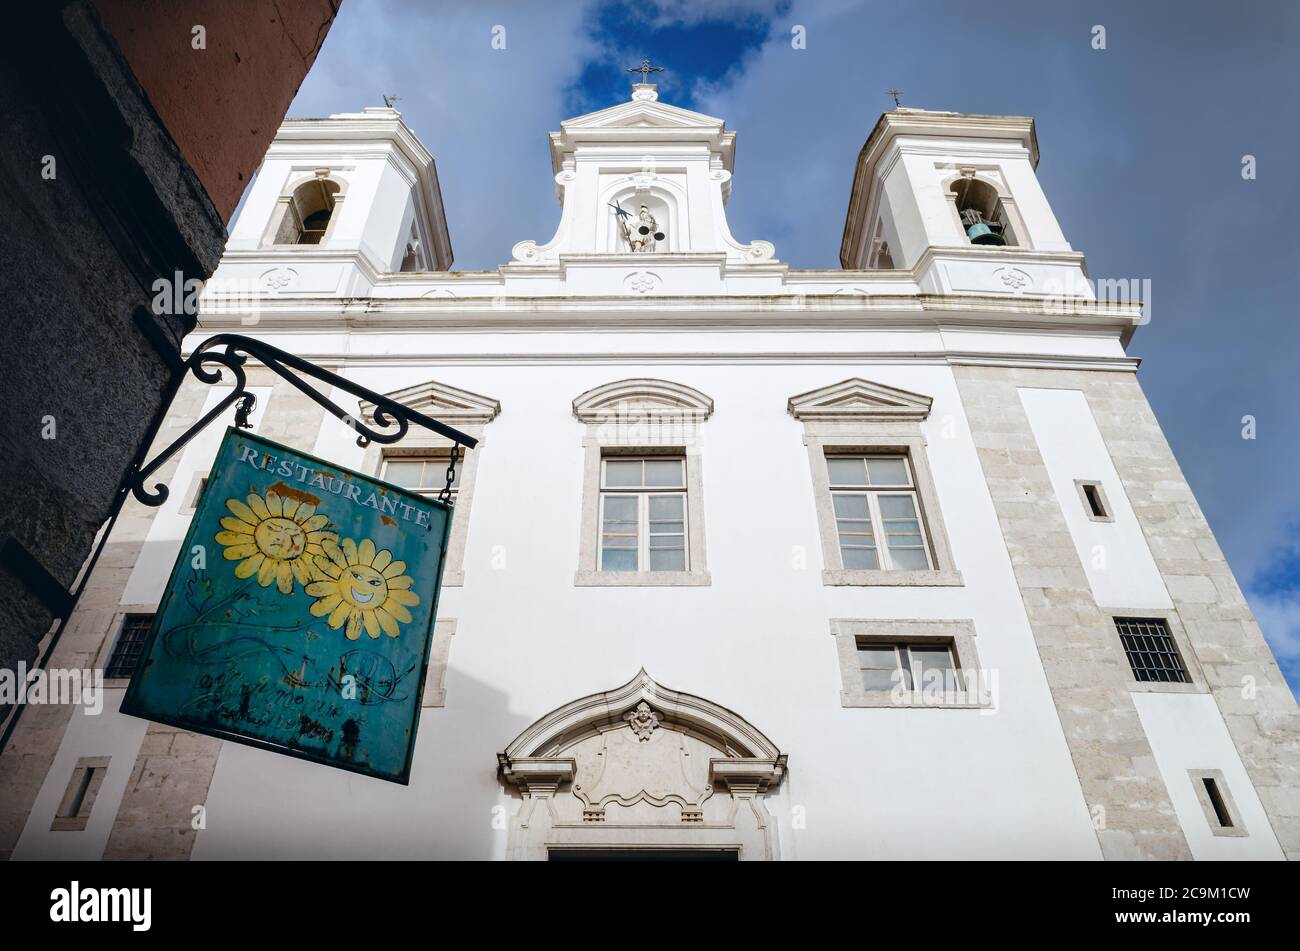 LISBON, PORTUGAL - FEBRUARY 2, 2019: Church of Sao Miguel and sign of a nearby typical restaurant in Alfama, historic district of Lisbon, Portugal, fa Stock Photo